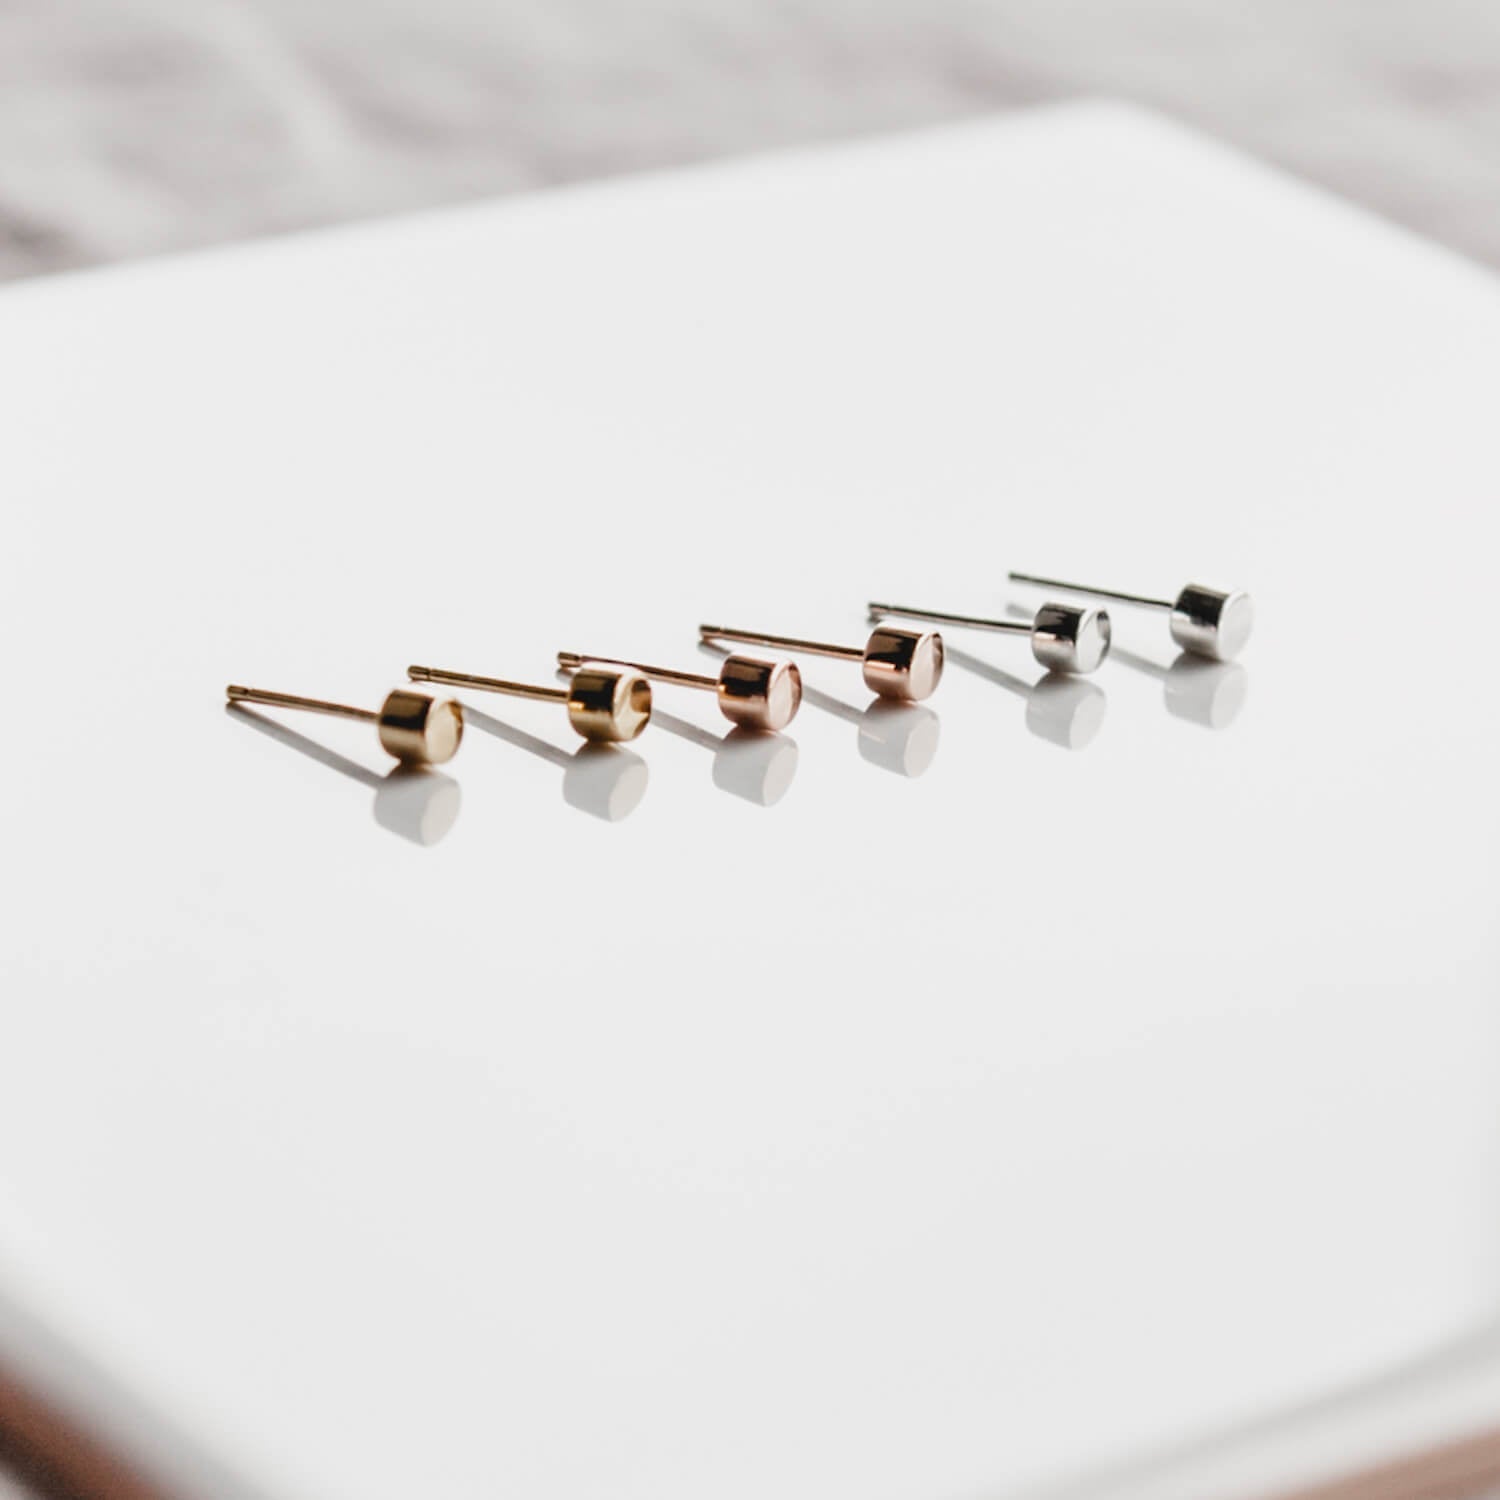 Simple silver, gold and rose gold Matthew Calvin dot stud earrings in a row on a white tile